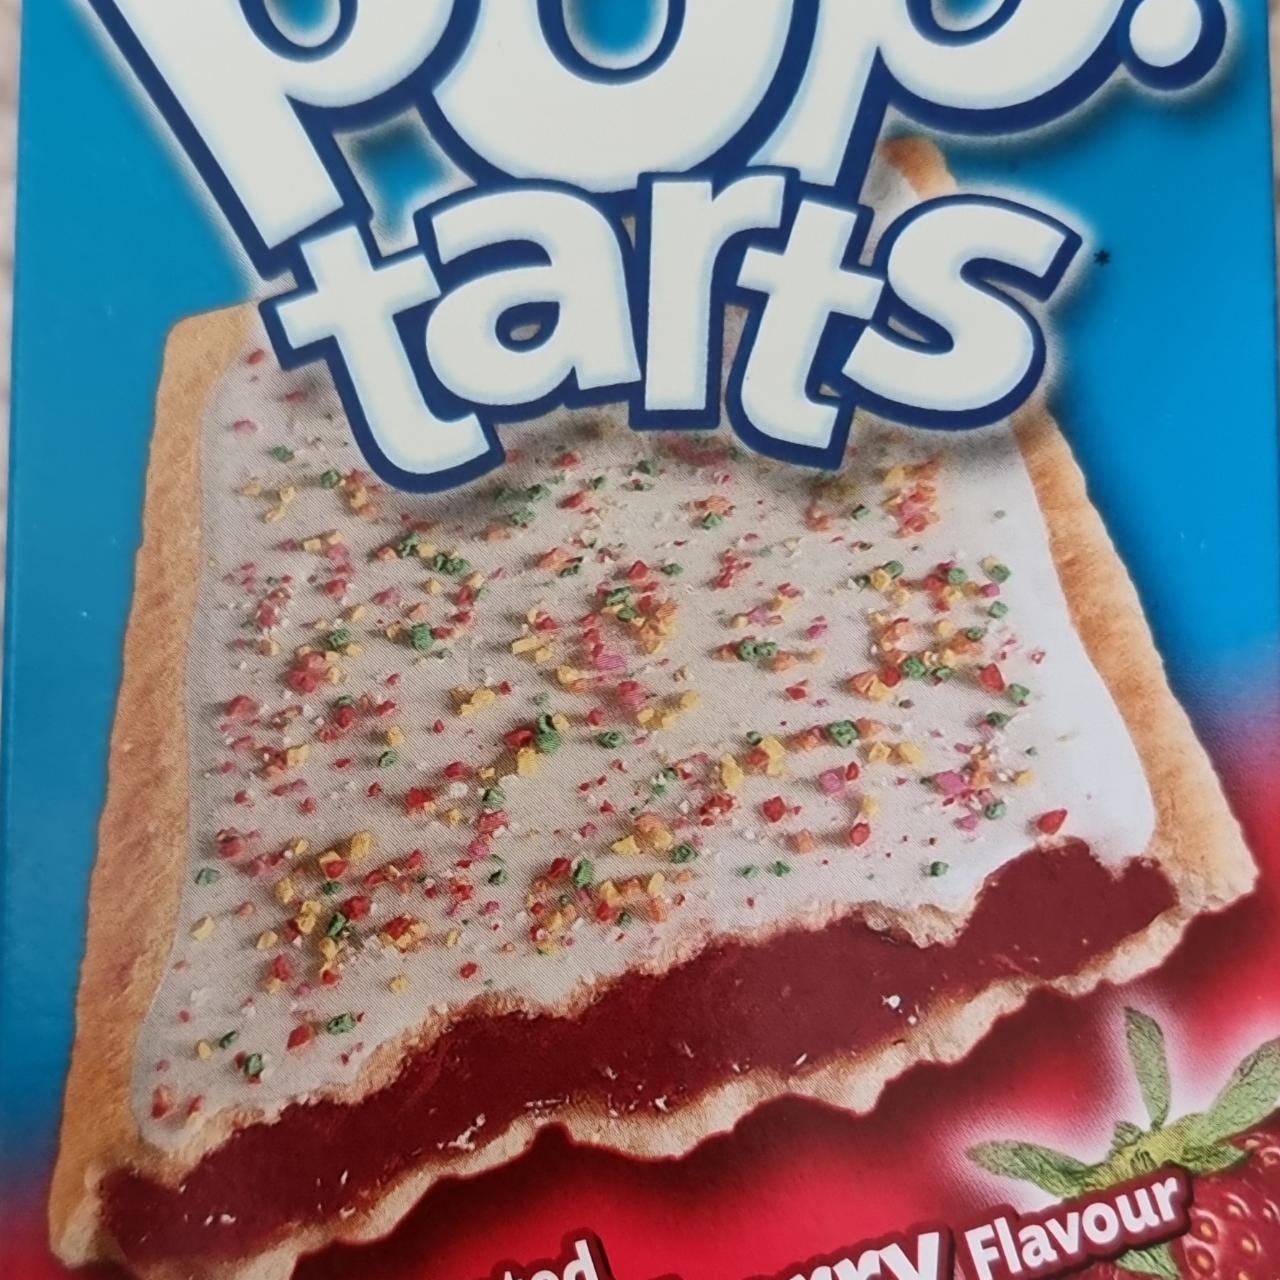 Fotografie - Frosted Strawberry Flavour Pop Tarts